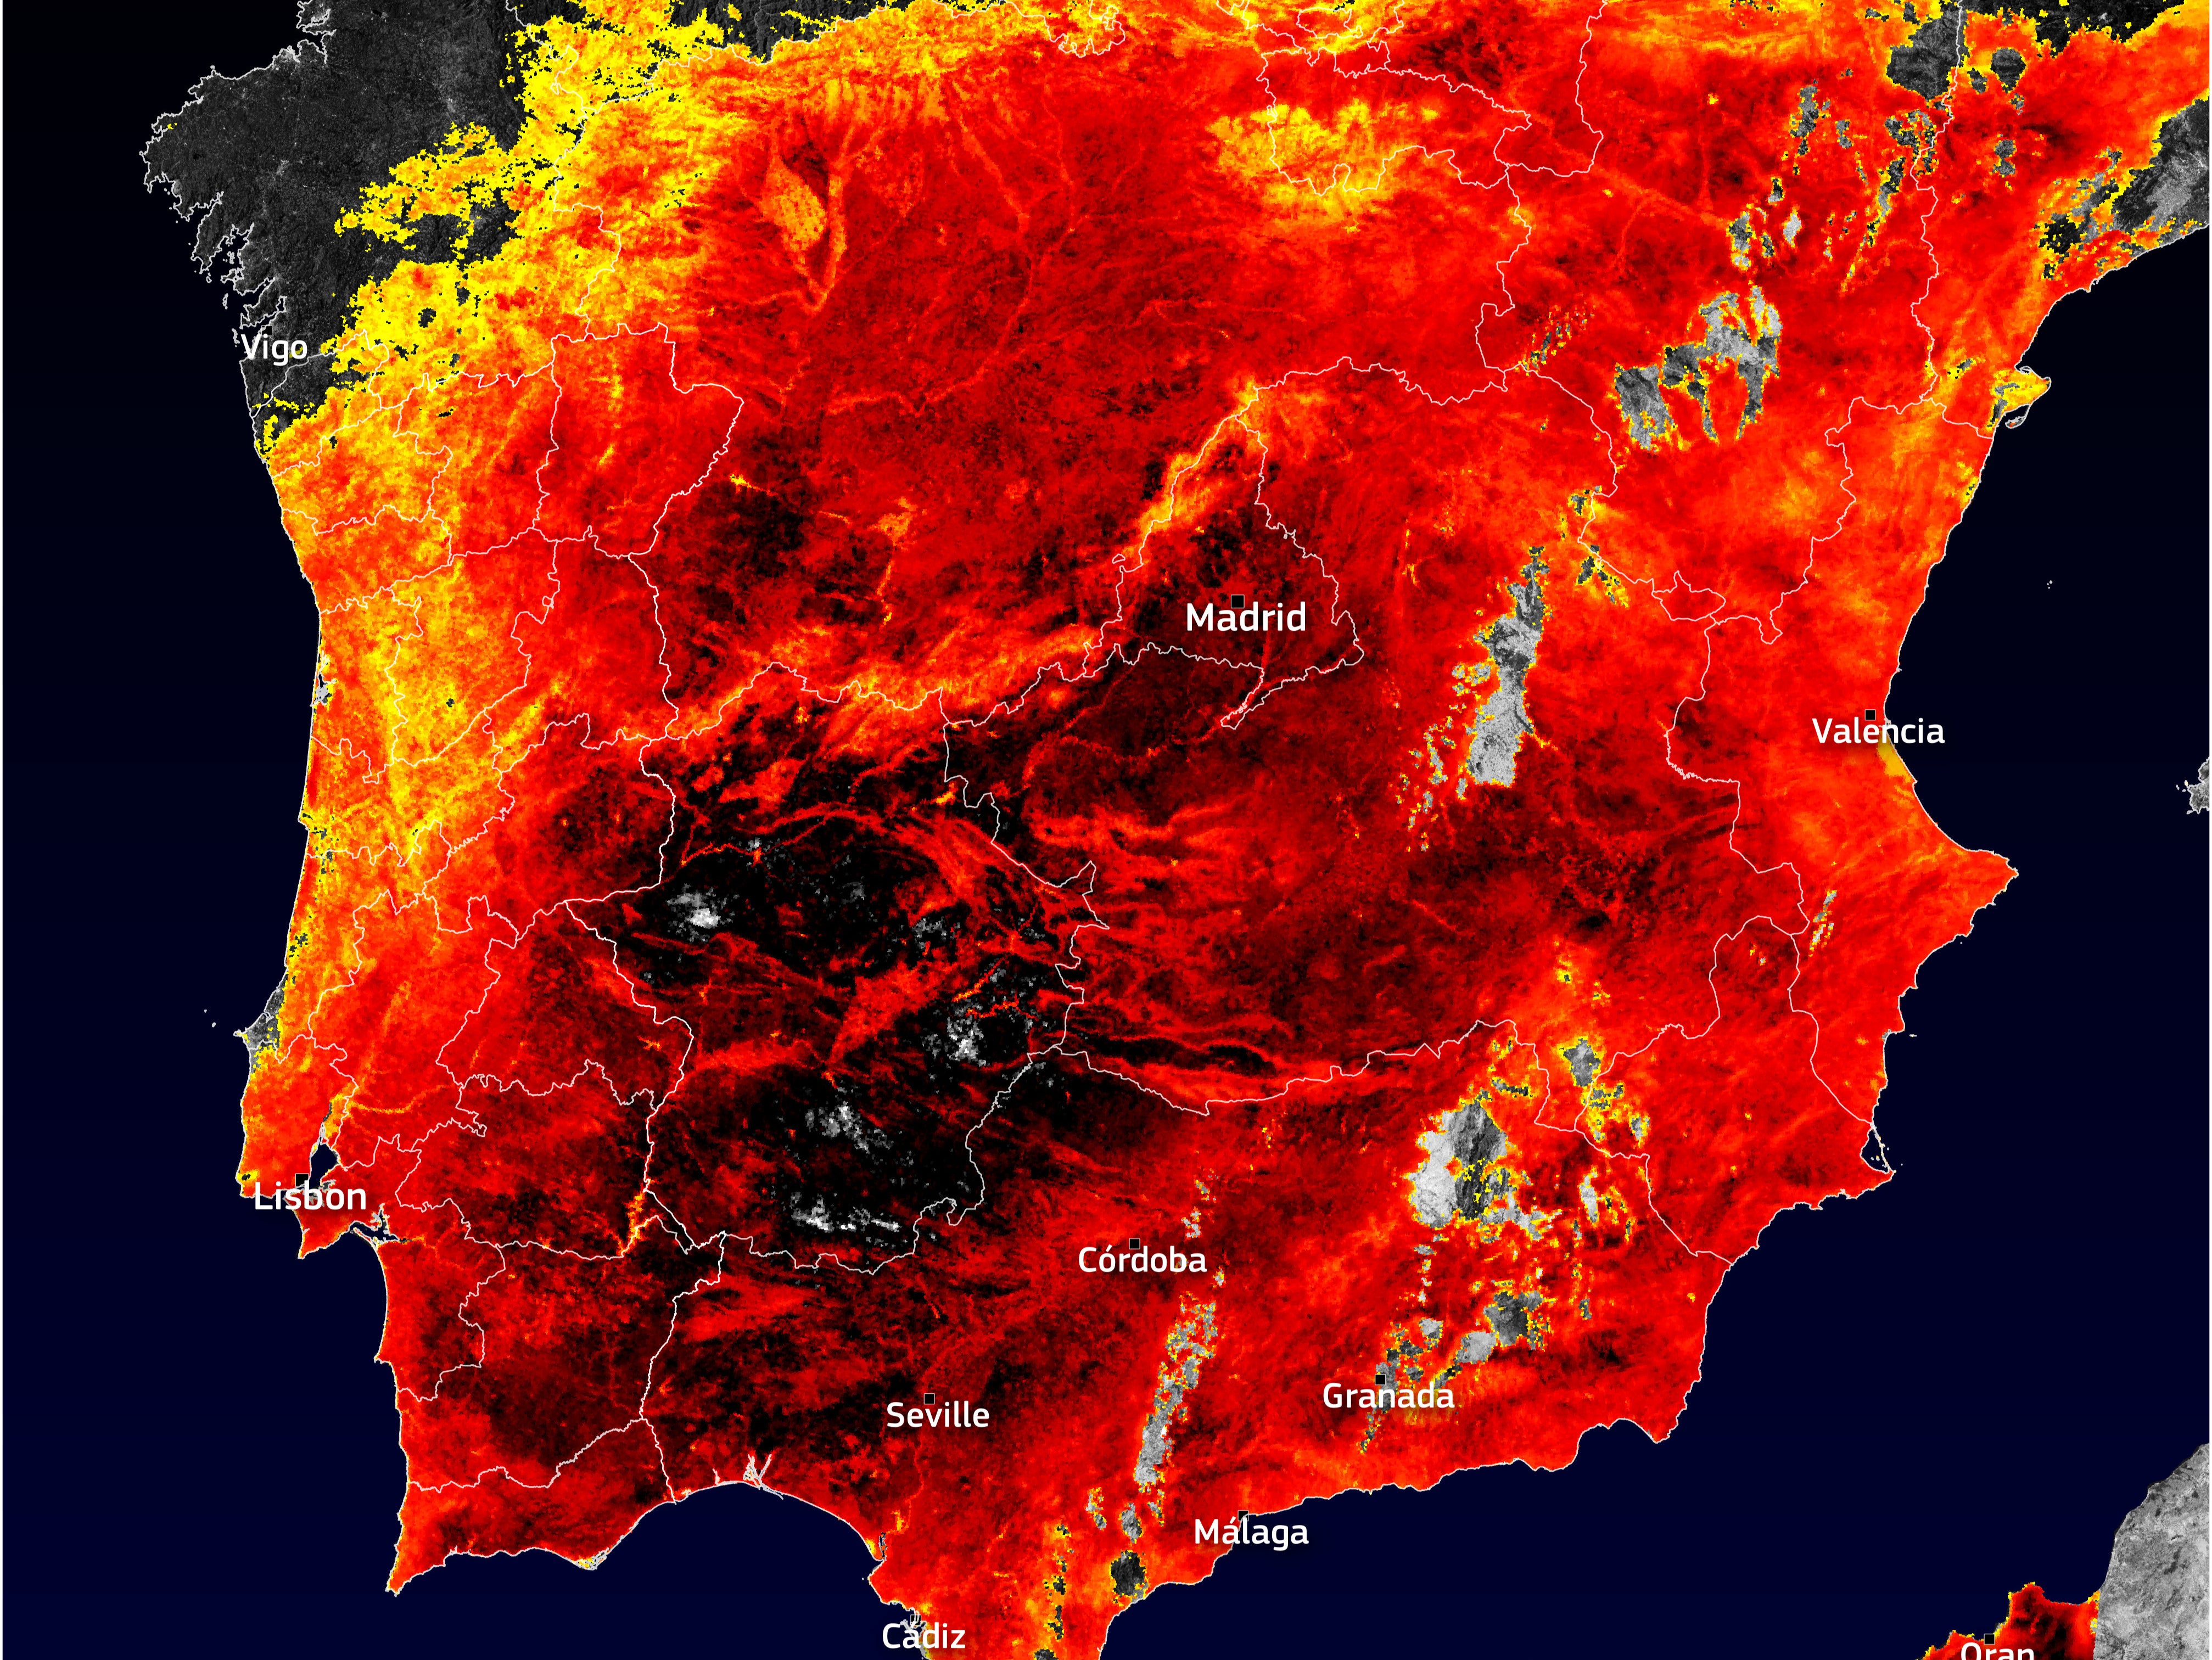 By contrast to gusty Great Britain, this heat map shows extreme temperatures across Spain